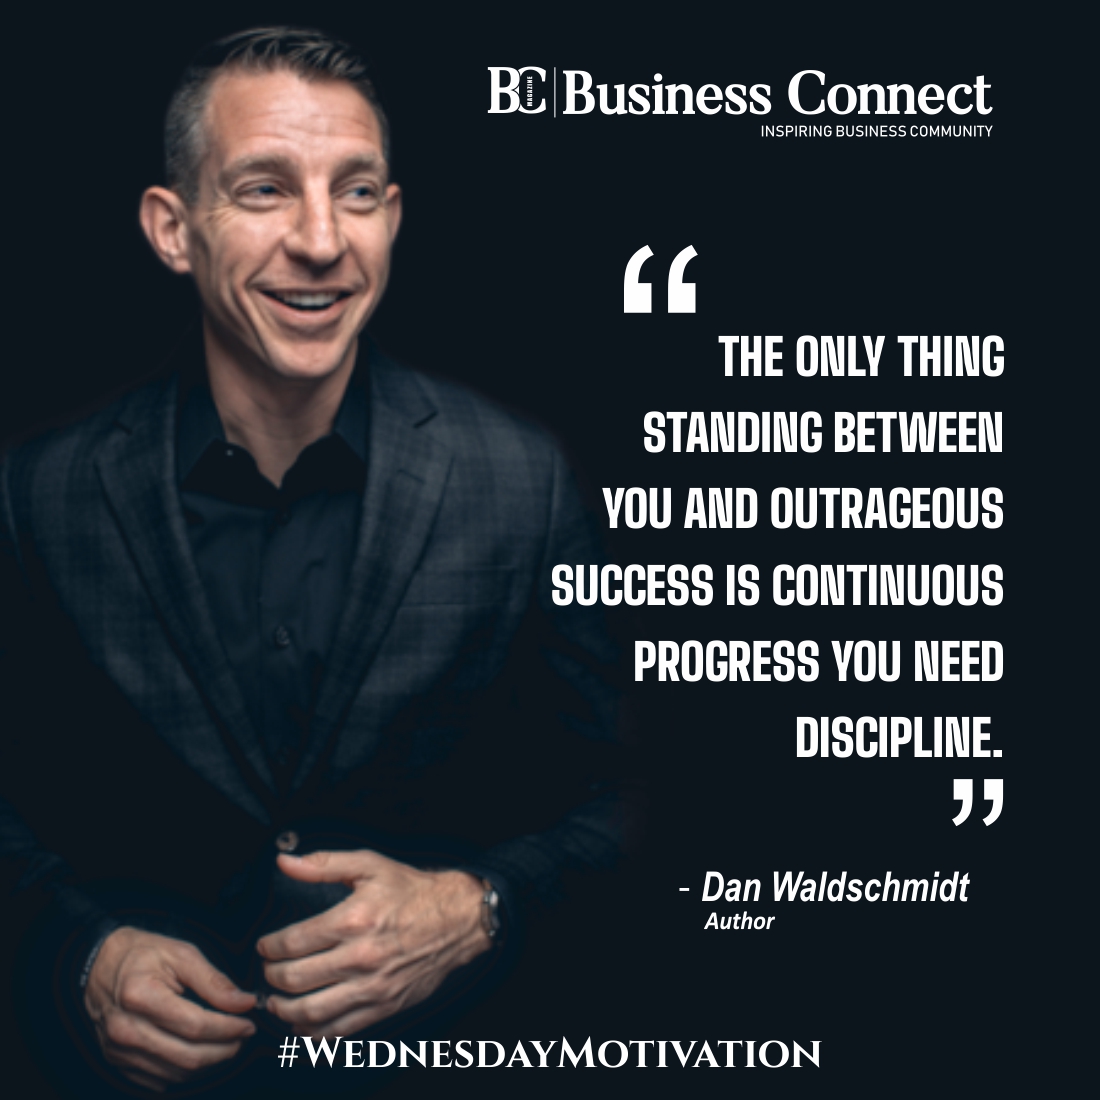 'The only thing standing between you and outrageous success is continuous progress you need discipline.'- Dan Waldschmidt
#motivation #todayquote #quotes #wednesday #motivationdaily #motivatonvibes #Adani #motivationquotedaily #TravisHead #today #inspiration #todayquotes #morning